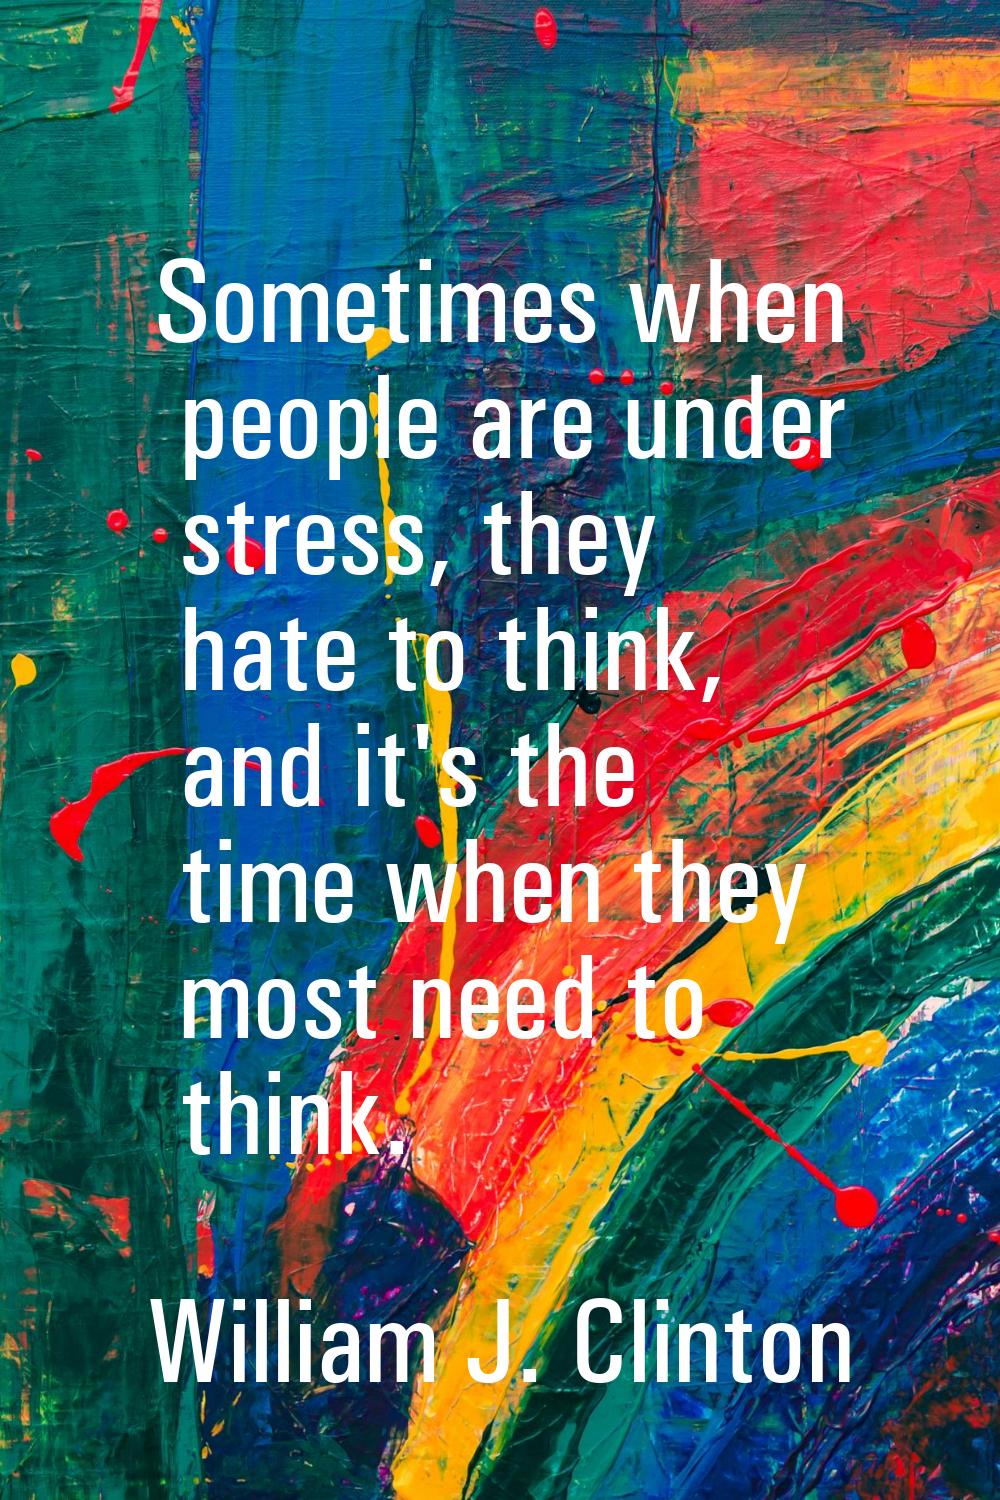 Sometimes when people are under stress, they hate to think, and it's the time when they most need t